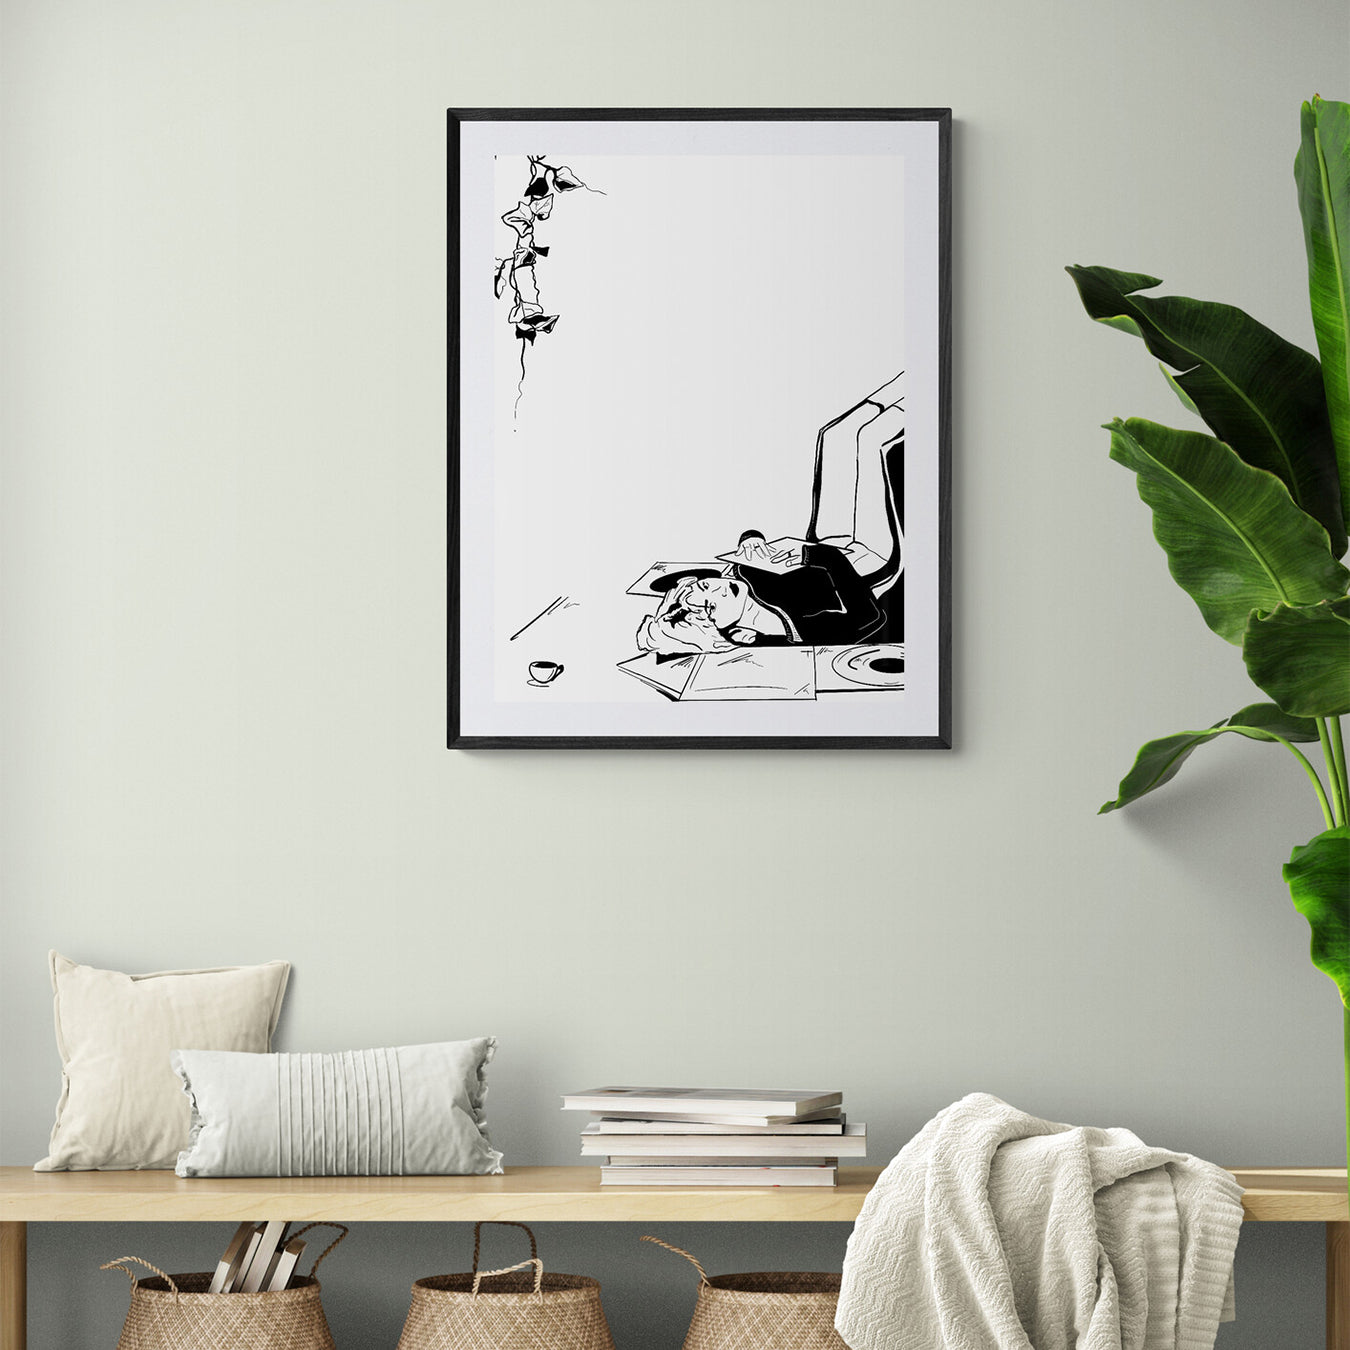 Courtney L Ellis Illustrations Art print by LGBTQ+ Illustration Artist Courtney Ellis. Wall art home decor and gifts. Jazz record collector black and white drawing of a girl holding her jazz record close to her chest with music records all around her. black and white art